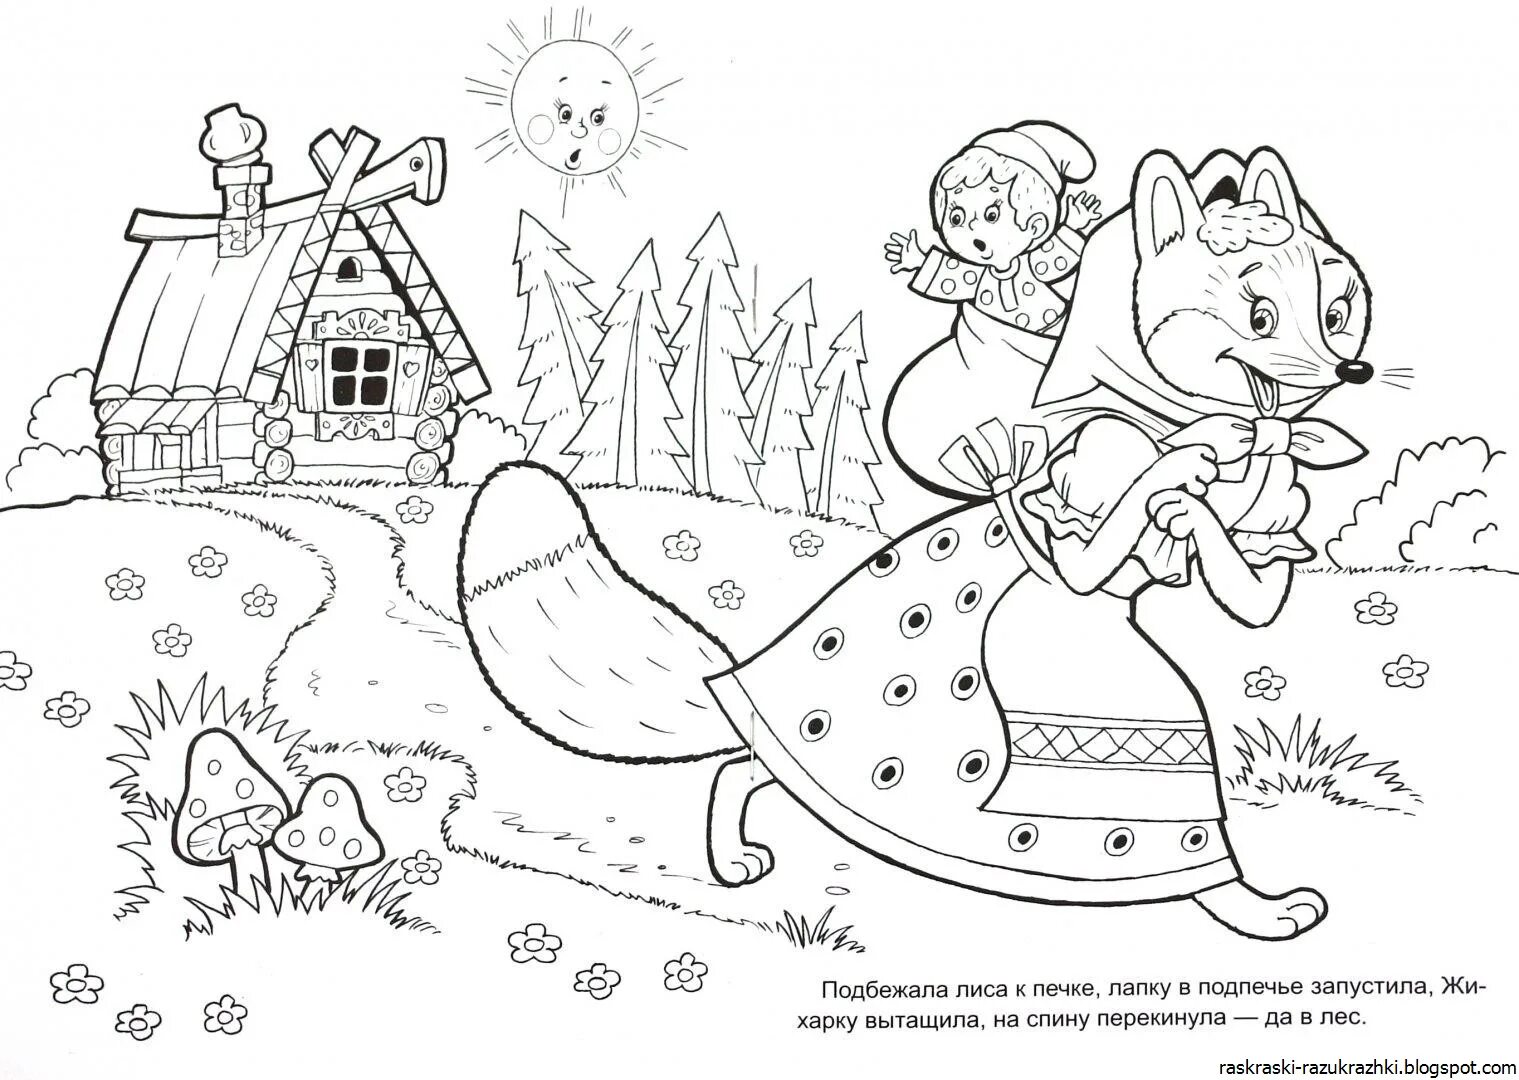 According to Russian folk tales for children 4 5 years old #5